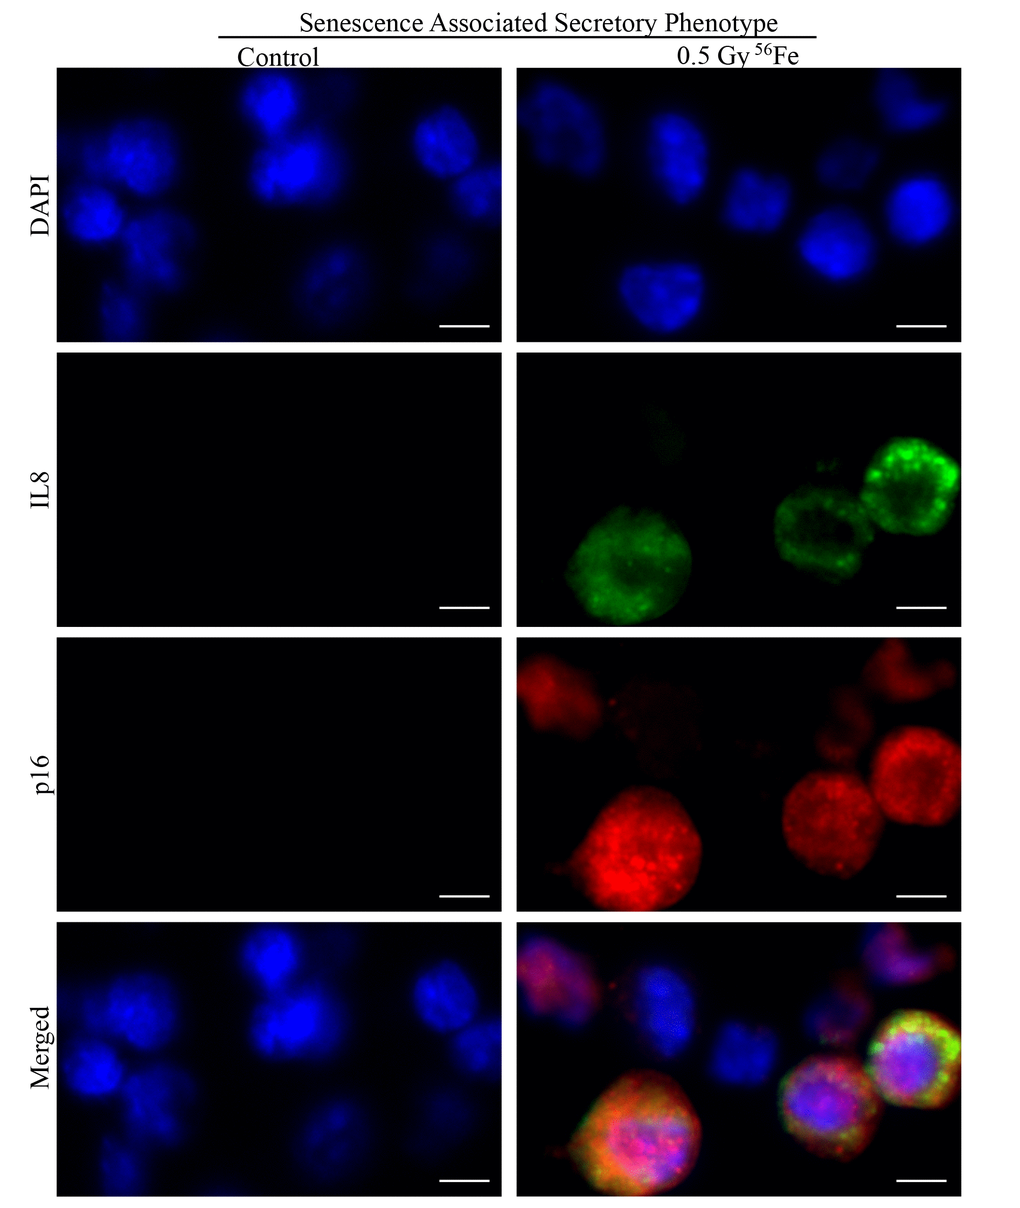 Representative IF images of ISC sections co-stained for SASP marker IL8 (green) and senescent marker p16 (red) showing some of the senescent cells acquiring secretory phenotype in irradiated samples. Scale bar, 5 μm.